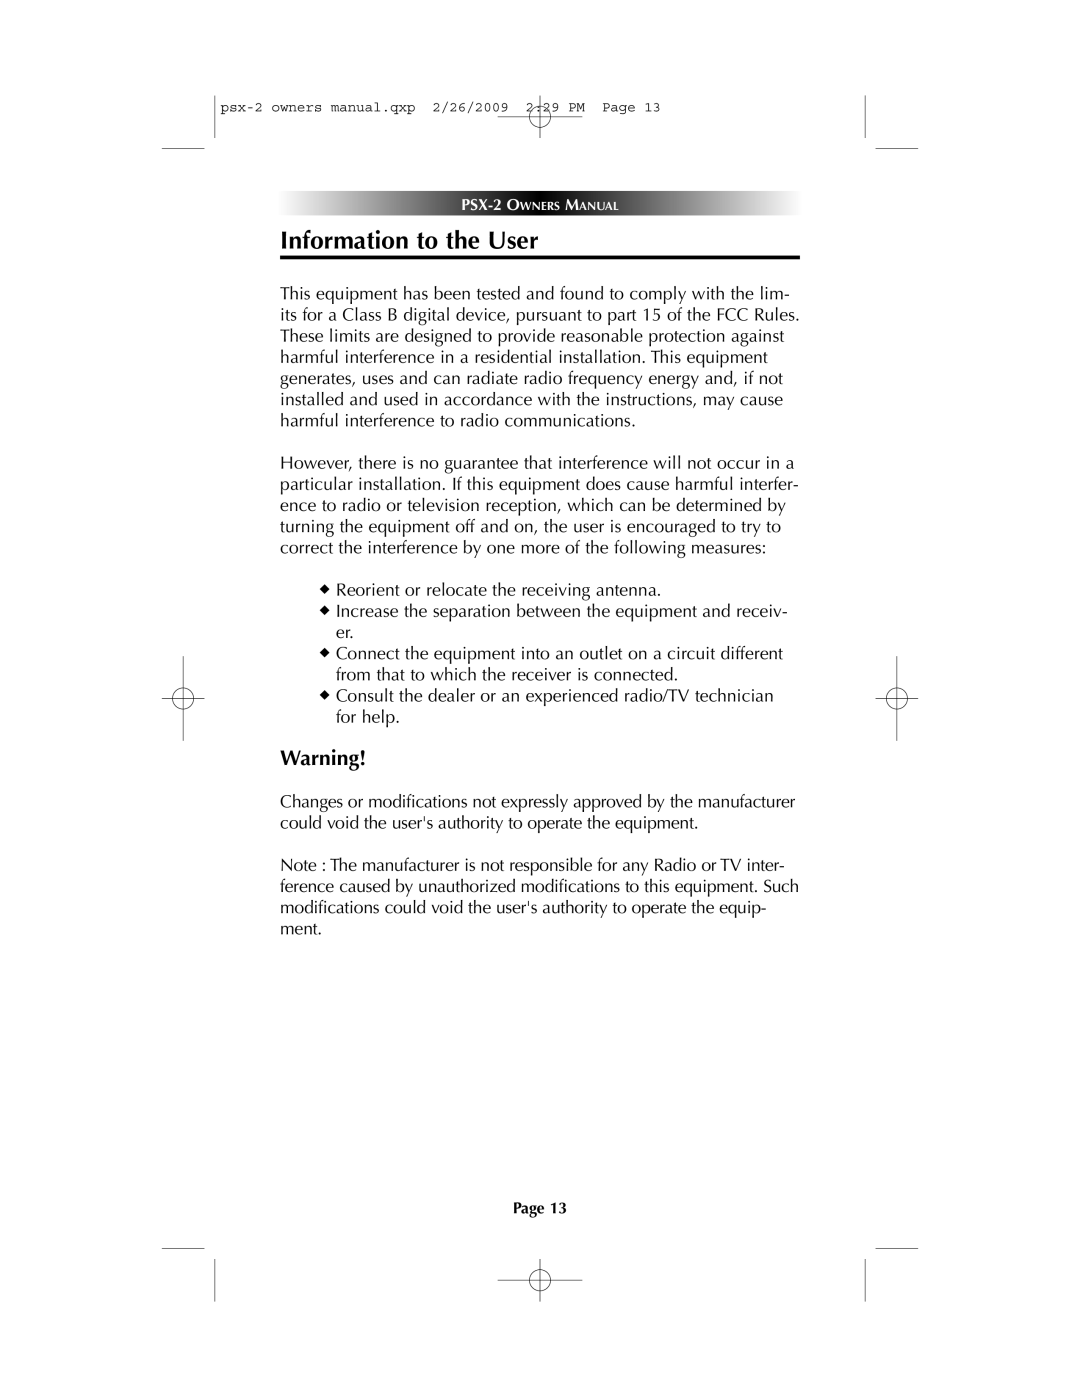 Universal PSX-2 owner manual Information to the User 